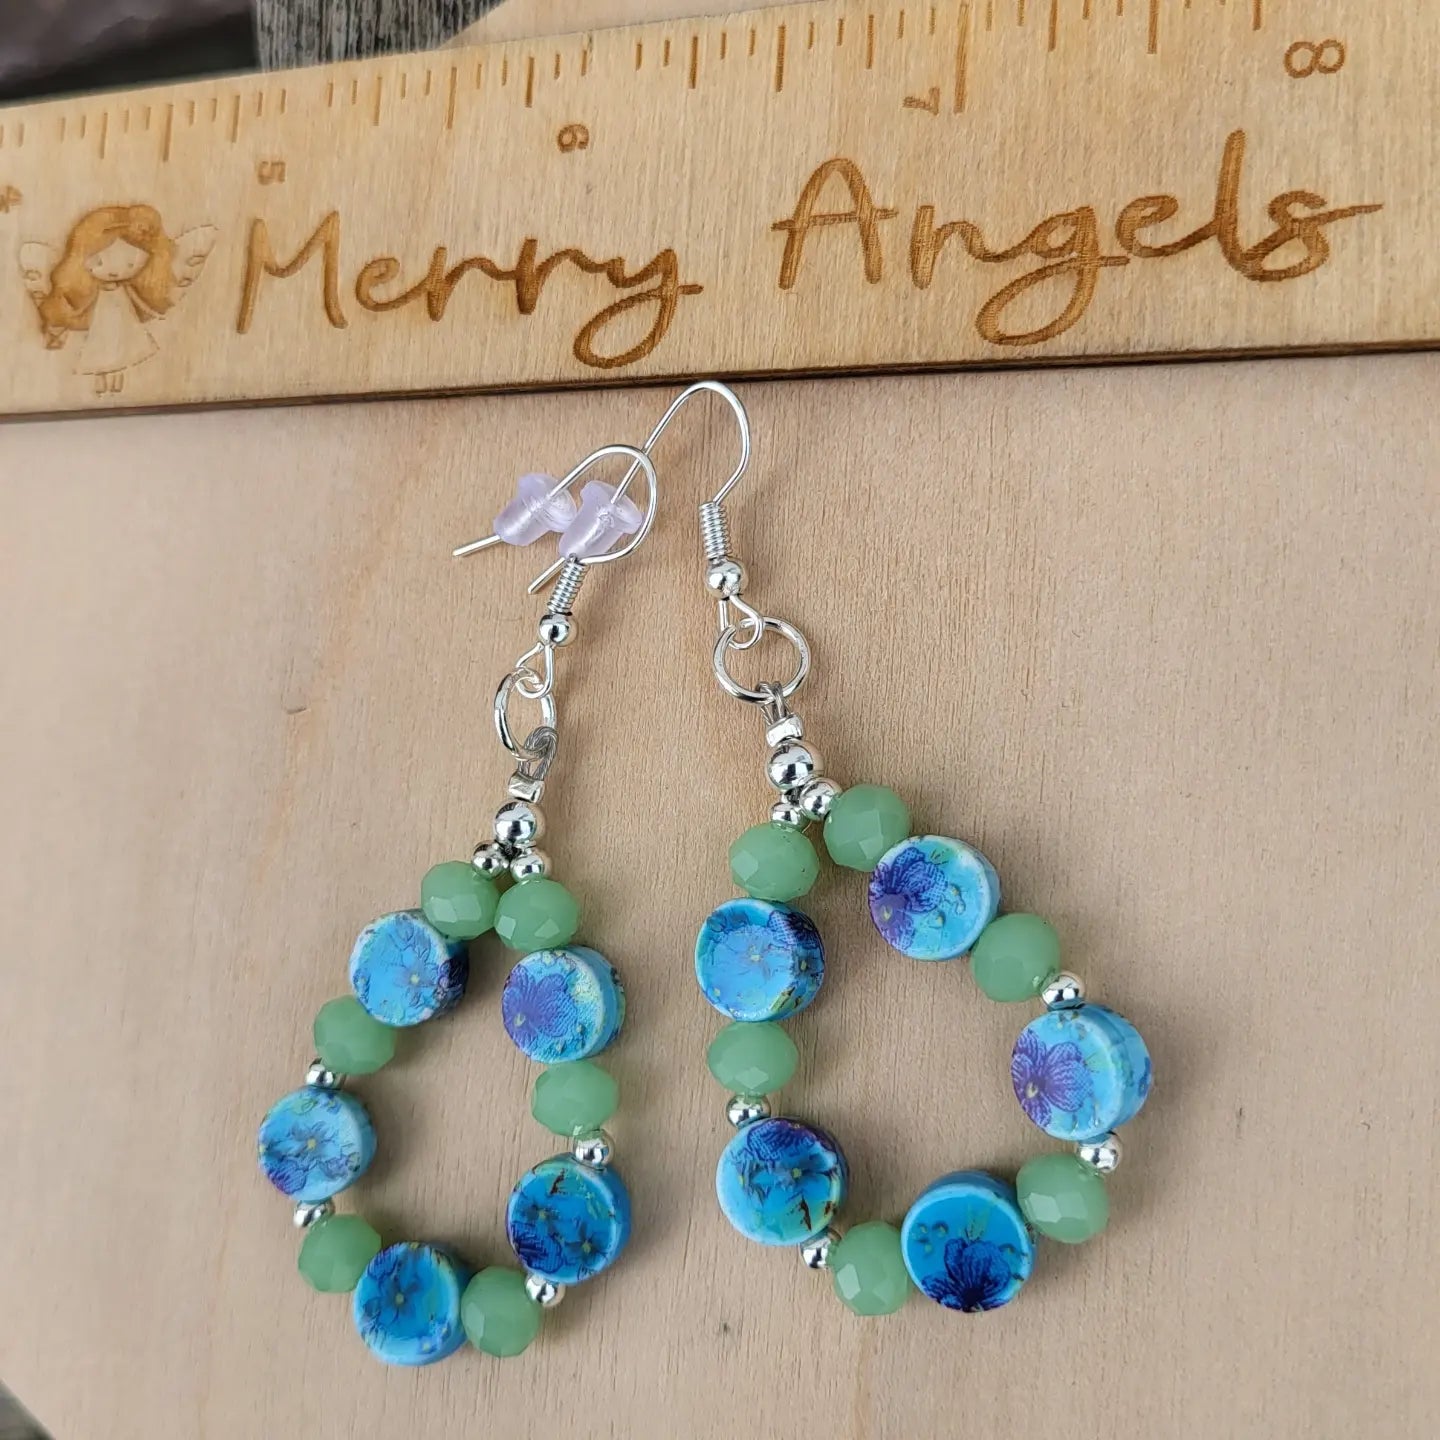 Green and blue oval shaped earrings